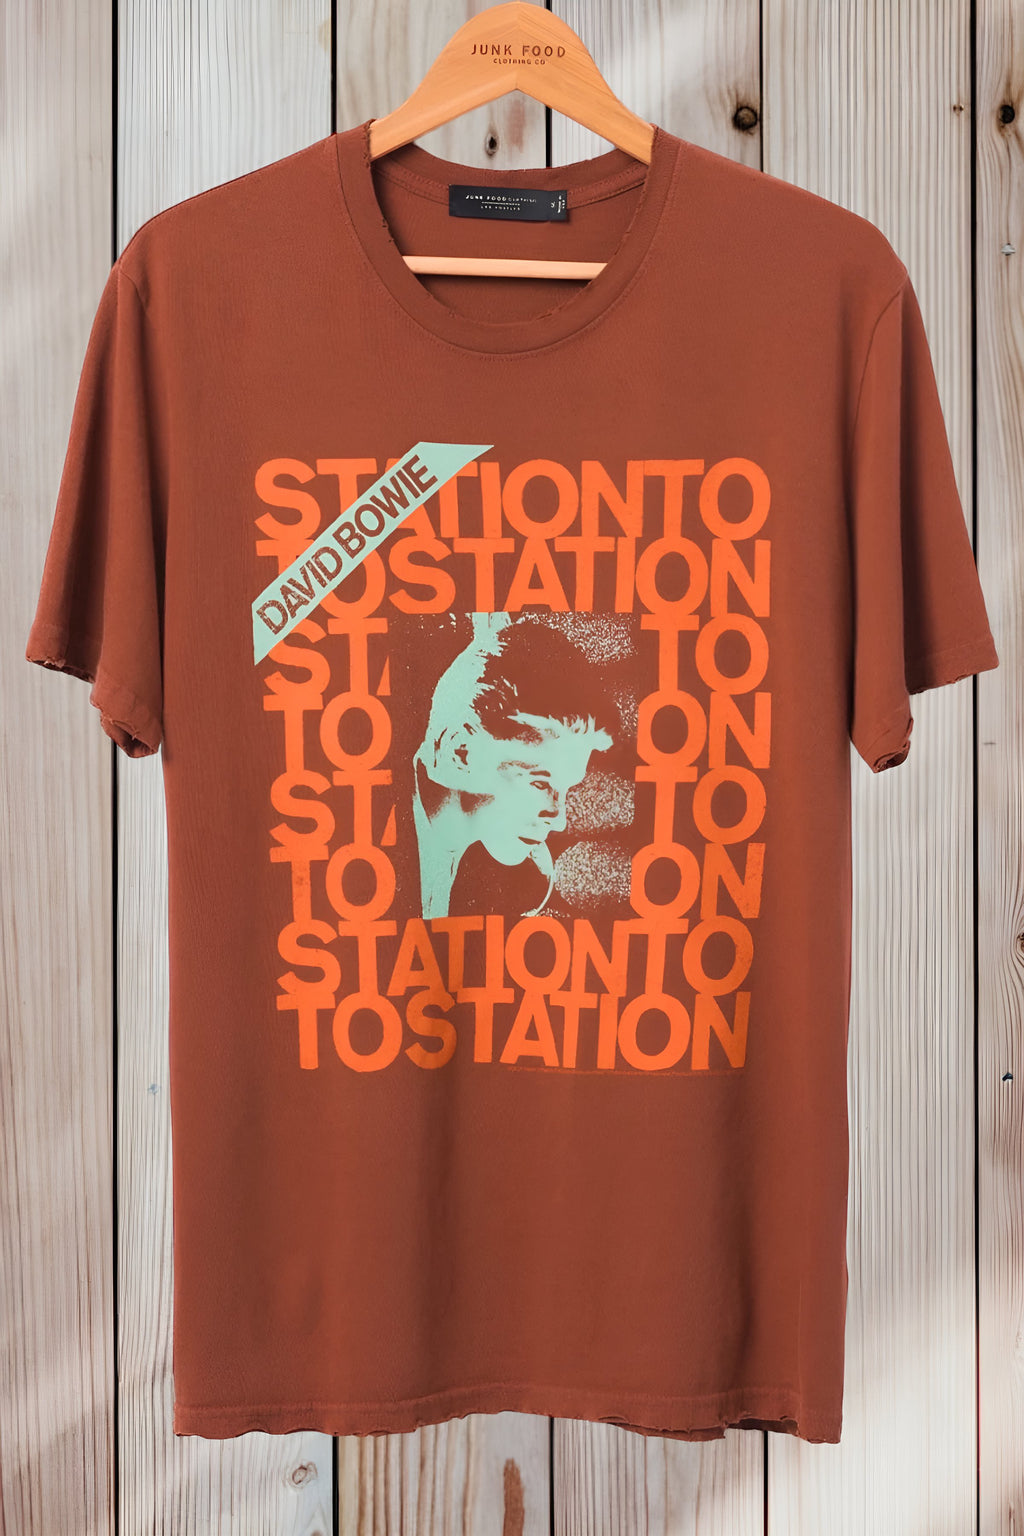 Junk Food Clothing - (unisex) DAVID BOWIE STATION TO STATION VINTAGE TEE